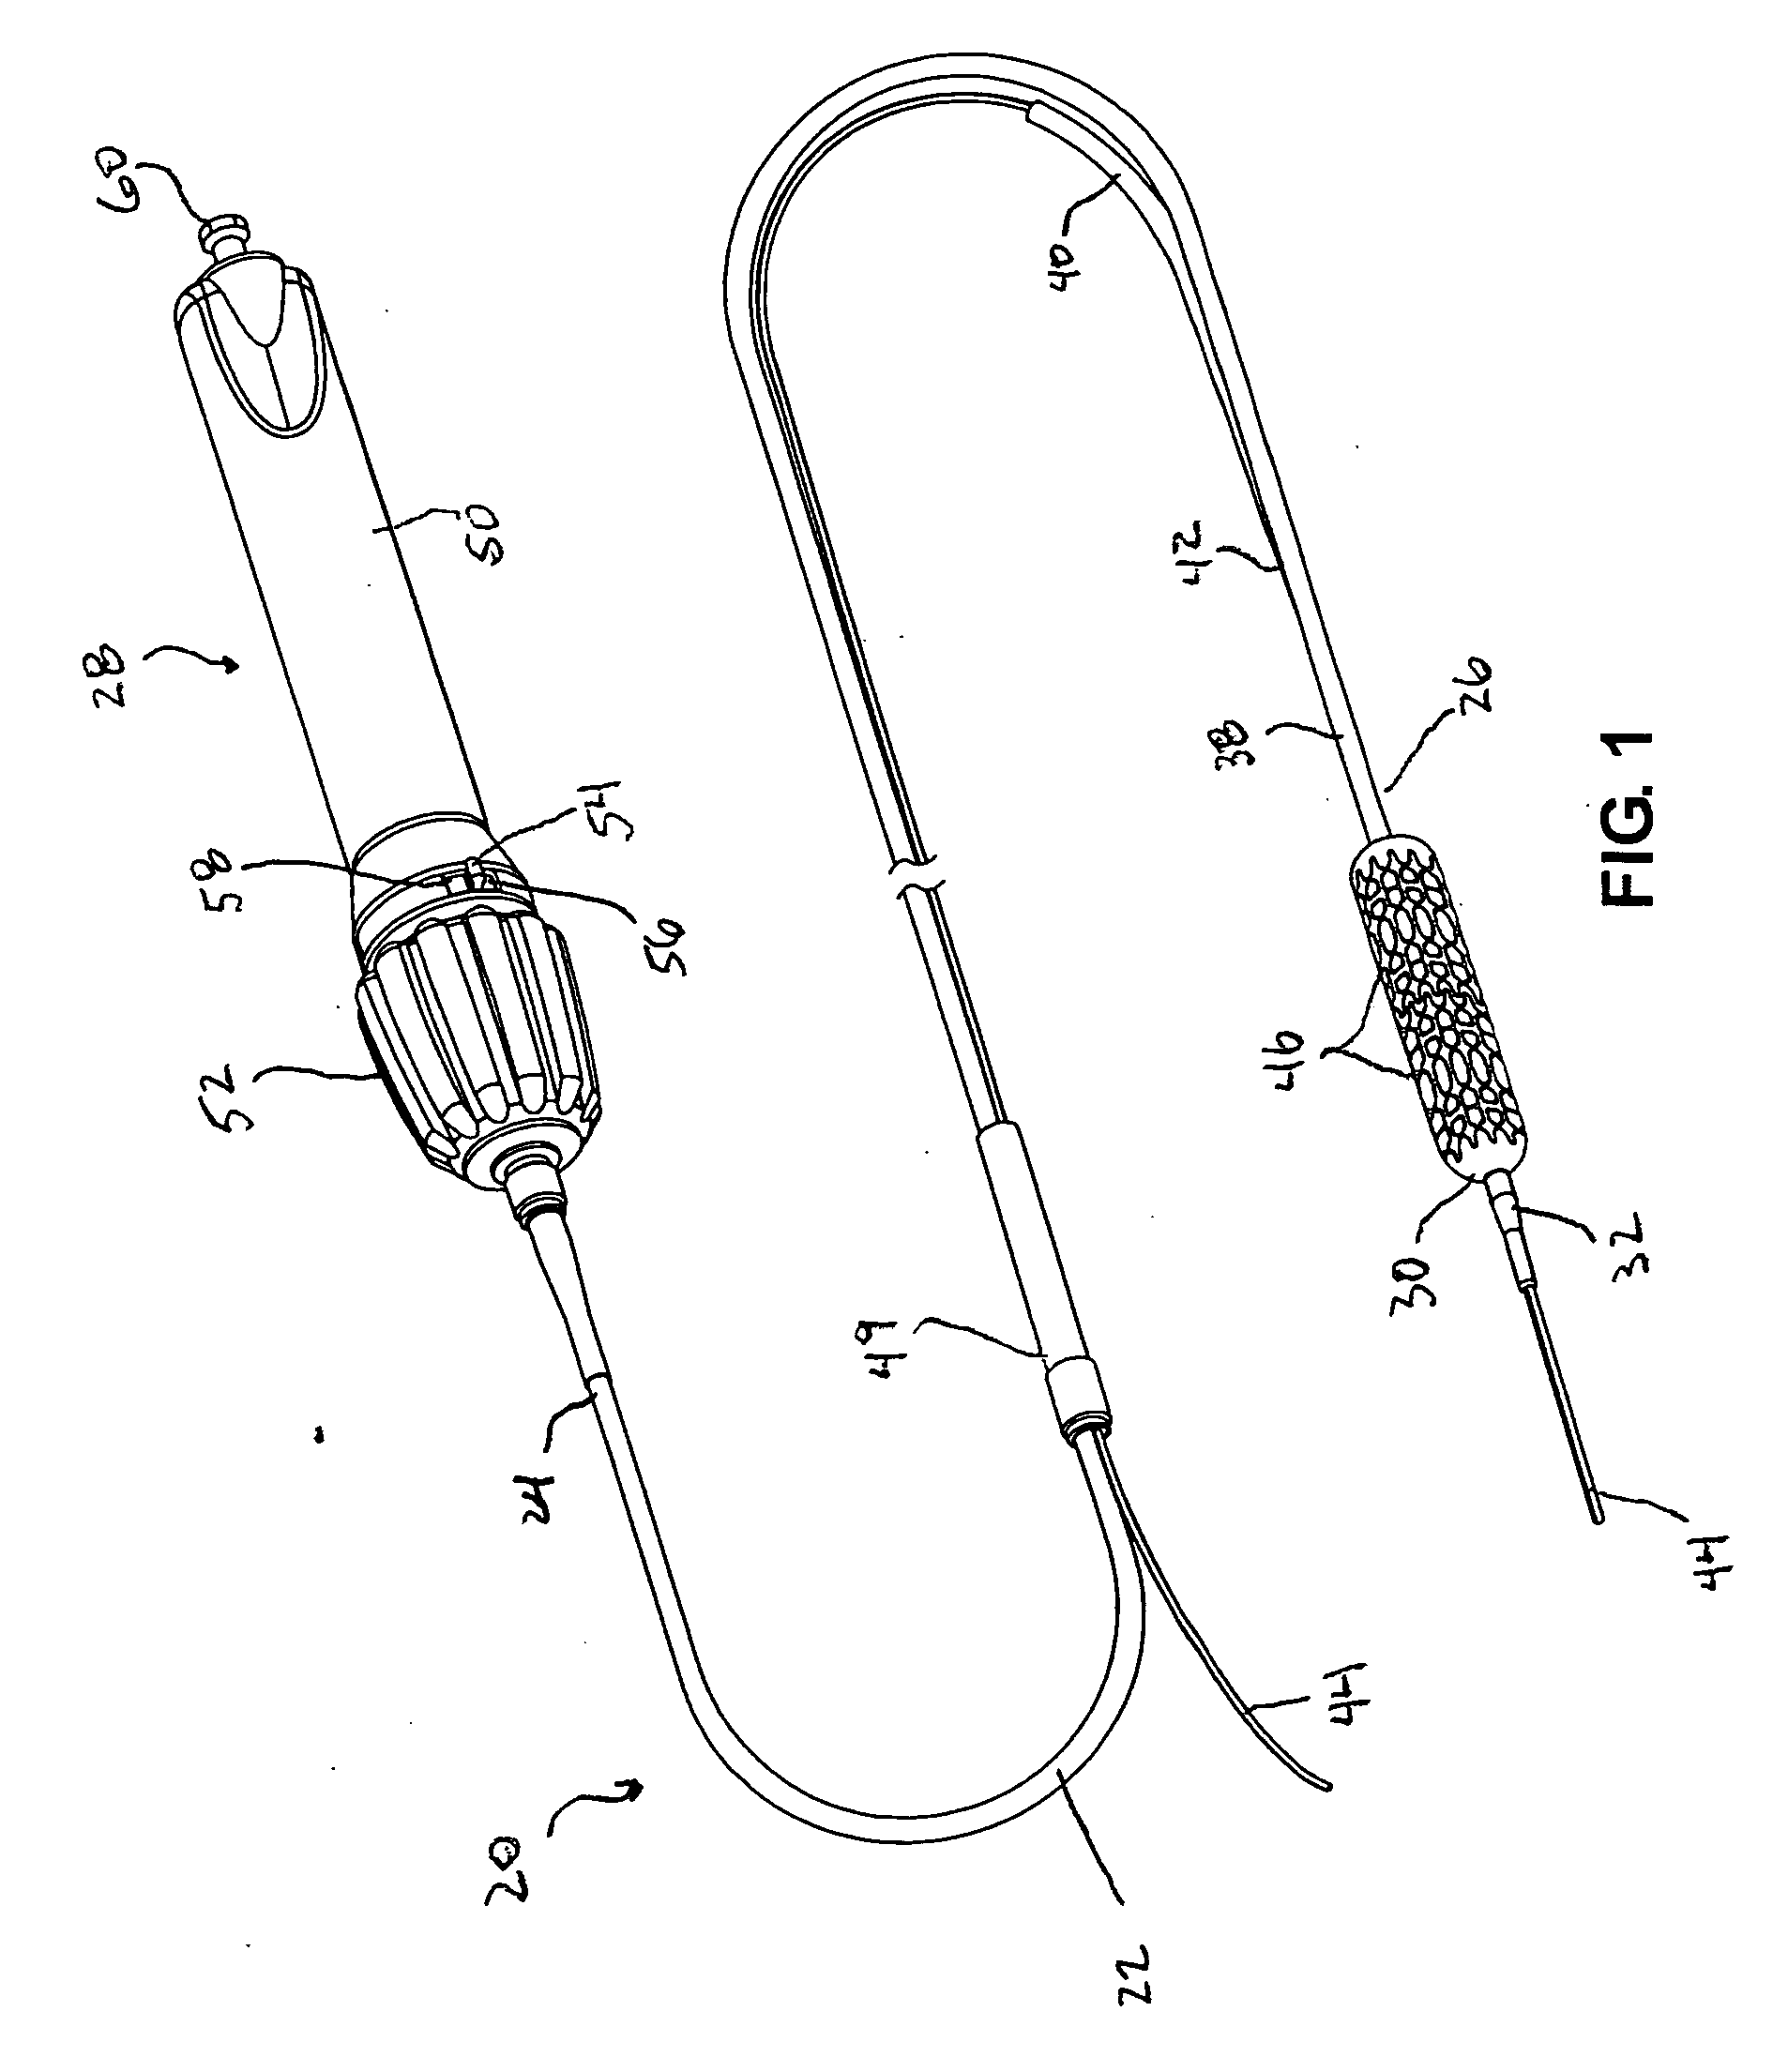 Devices and methods for operating and controlling interventional apparatus